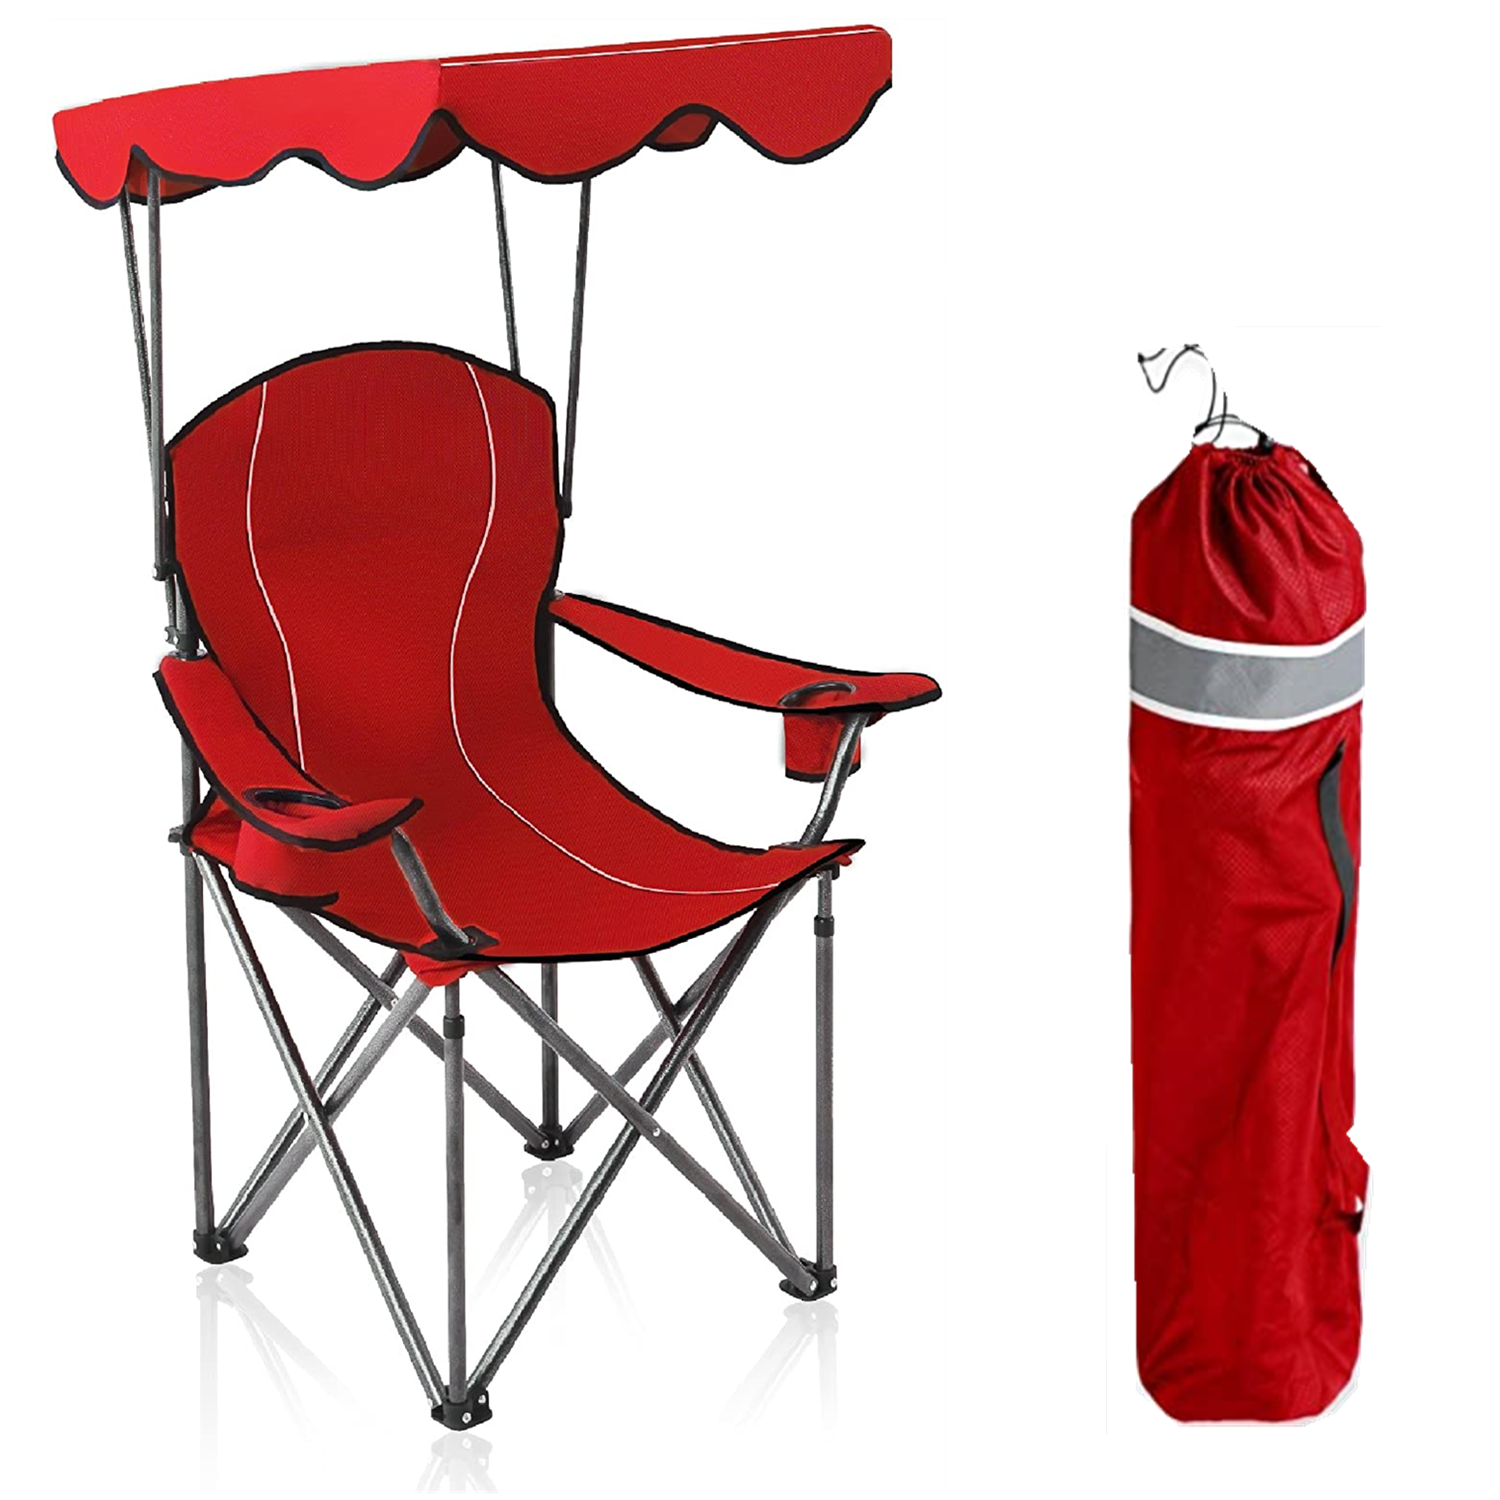 Camping Chairs With Canopy Shade Portable Outdoor Folding Chair Heavy Duty Red